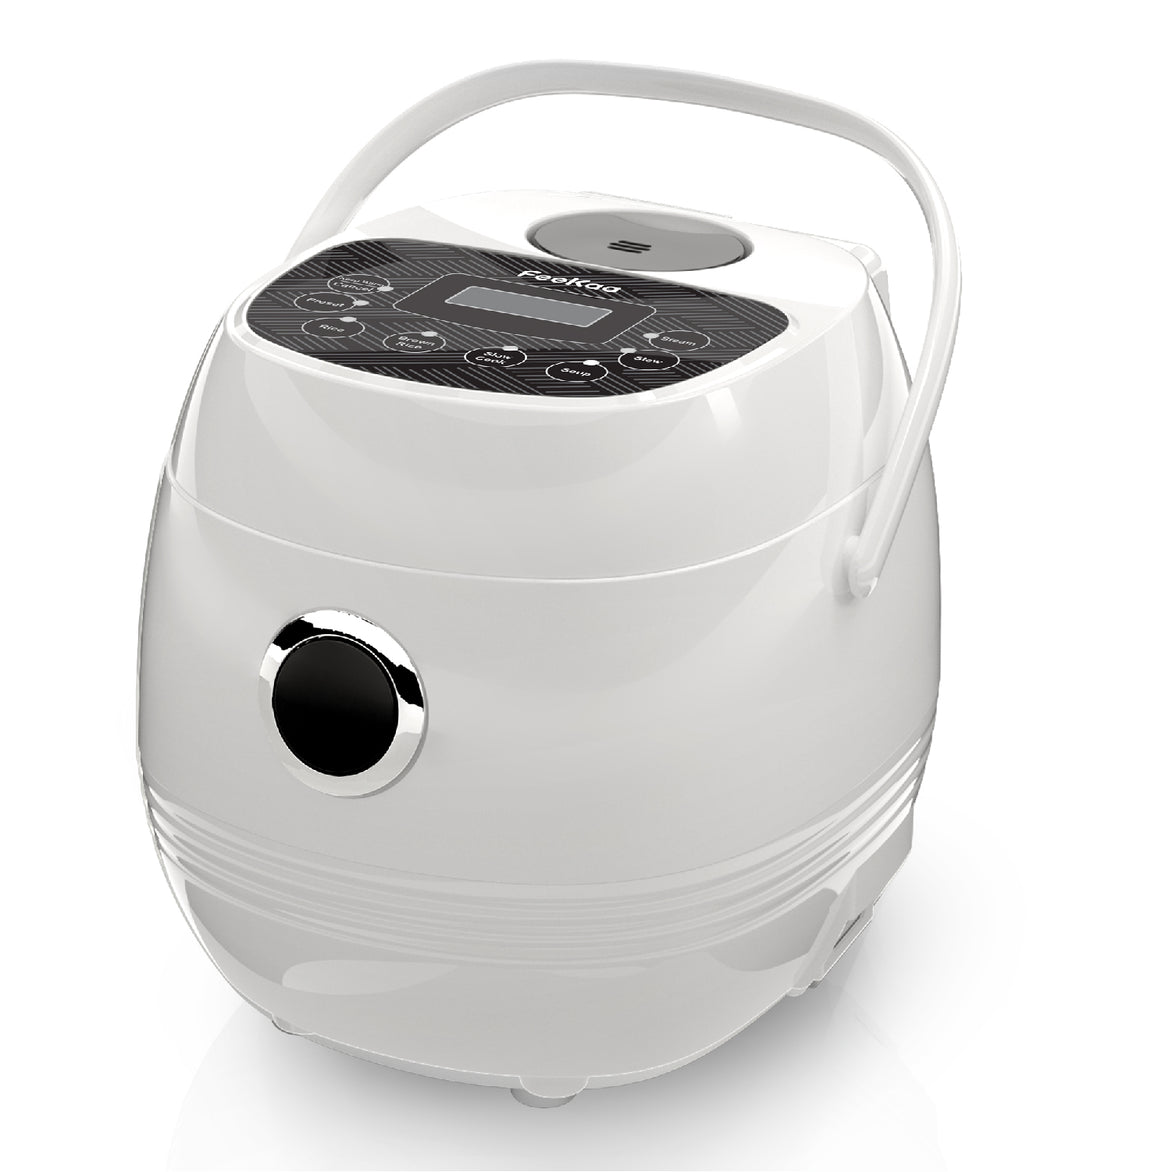 Aroma 32 Cups Residential Rice Cooker in the Rice Cookers